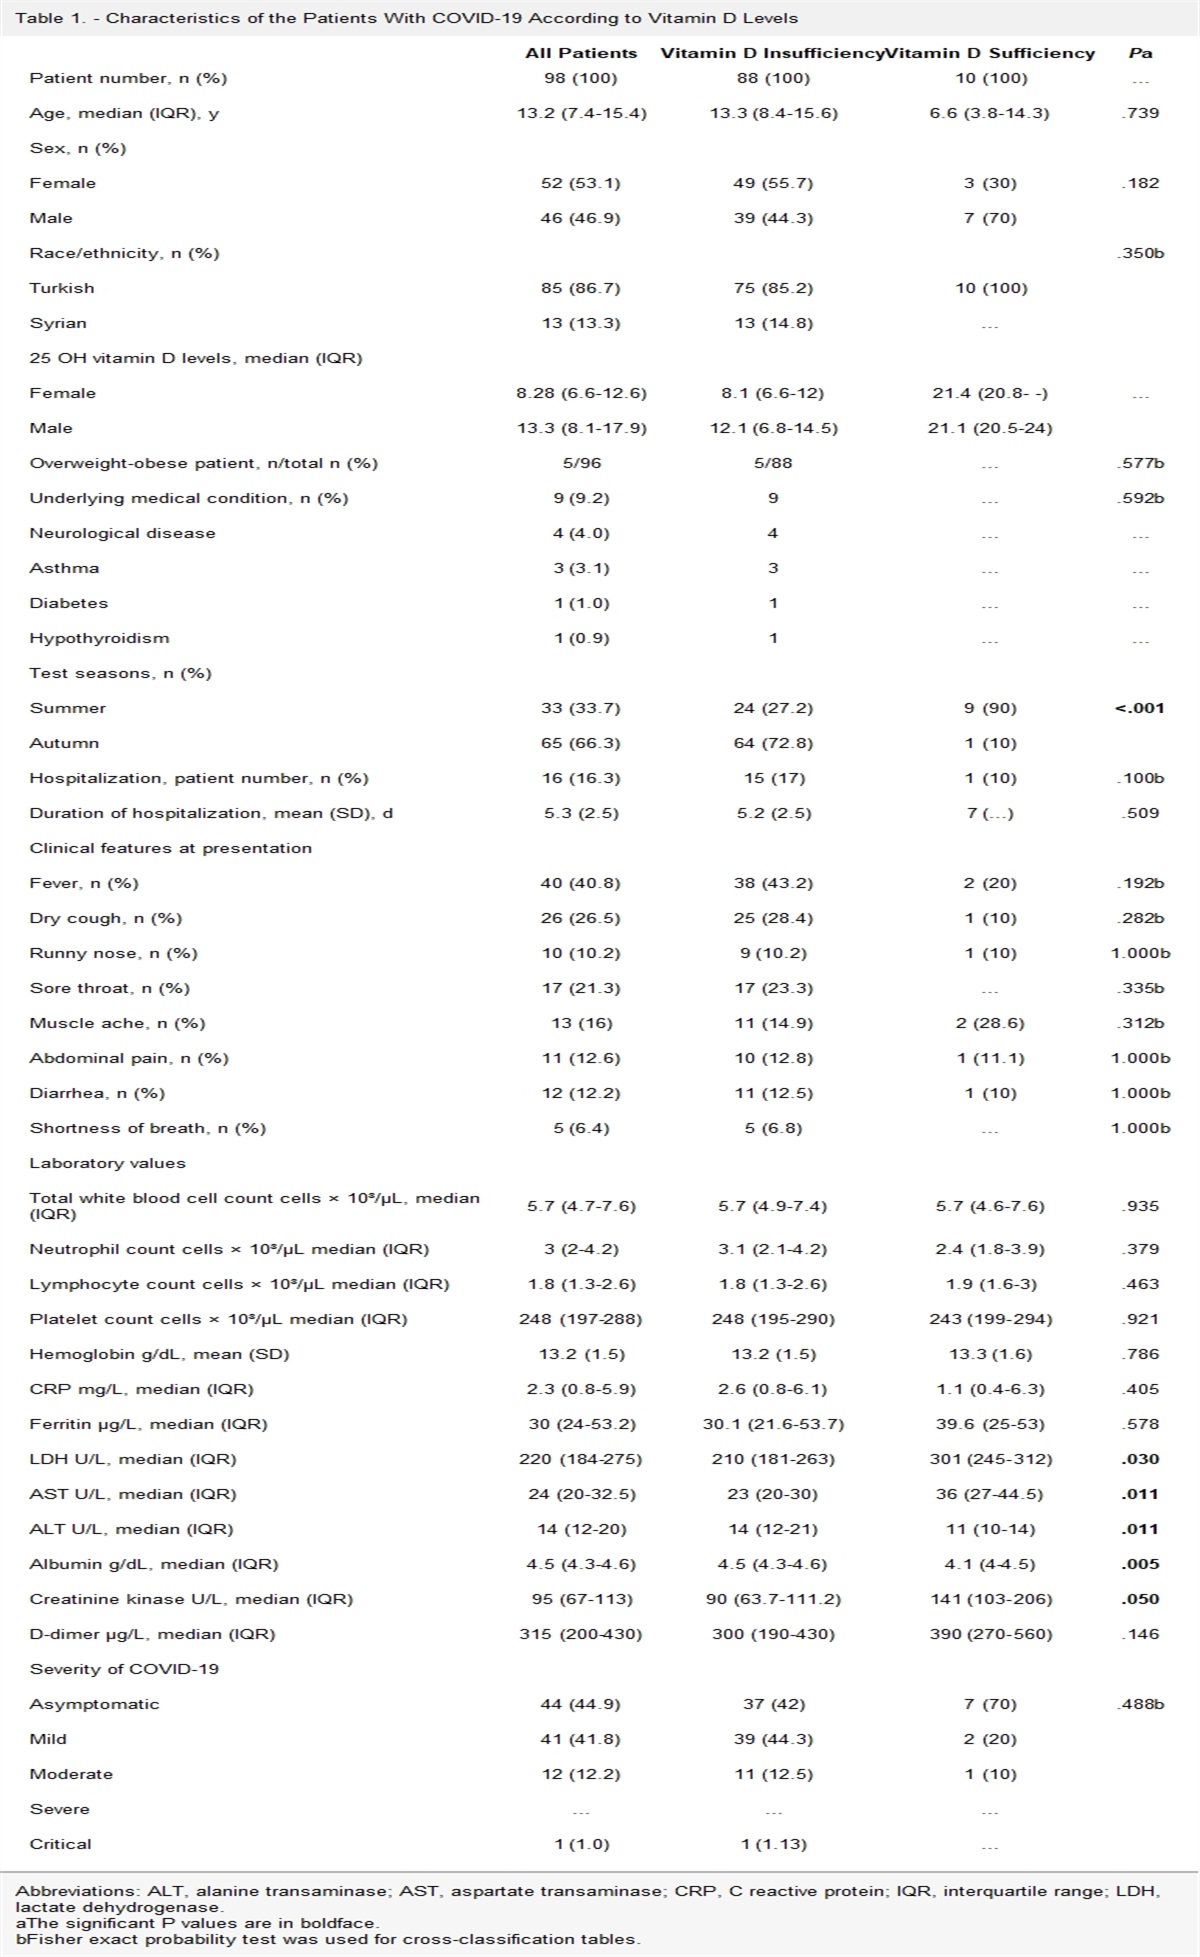 Vitamin D Concentrations in Pediatric Patients With COVID-19